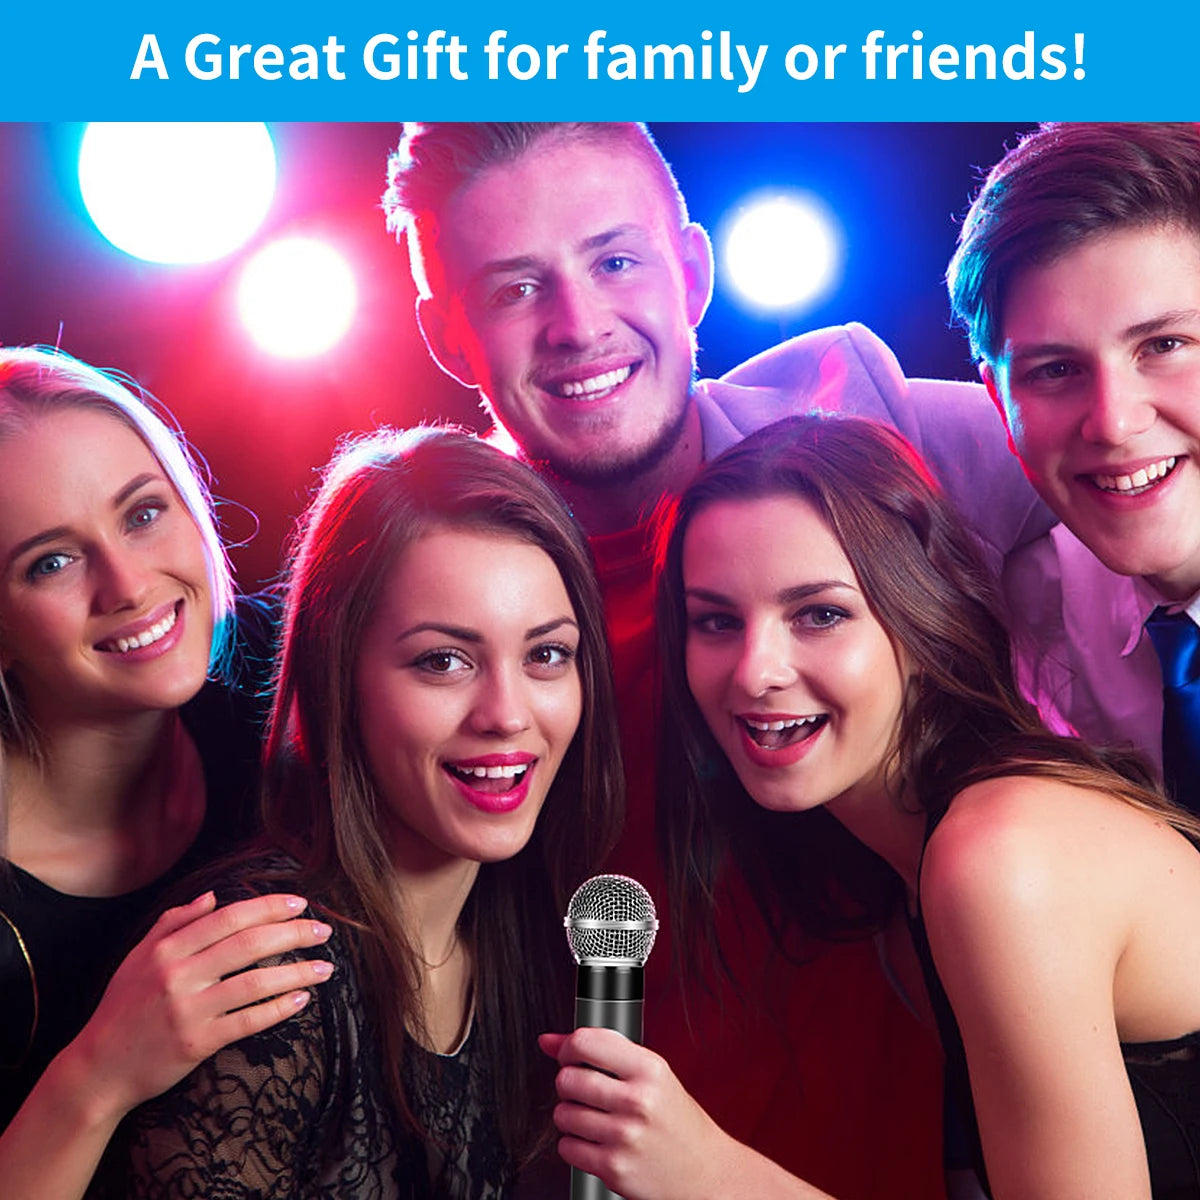 Wireless microphone 2 channel UHF fixed frequency dynamic microphone party karaoke church show meeting